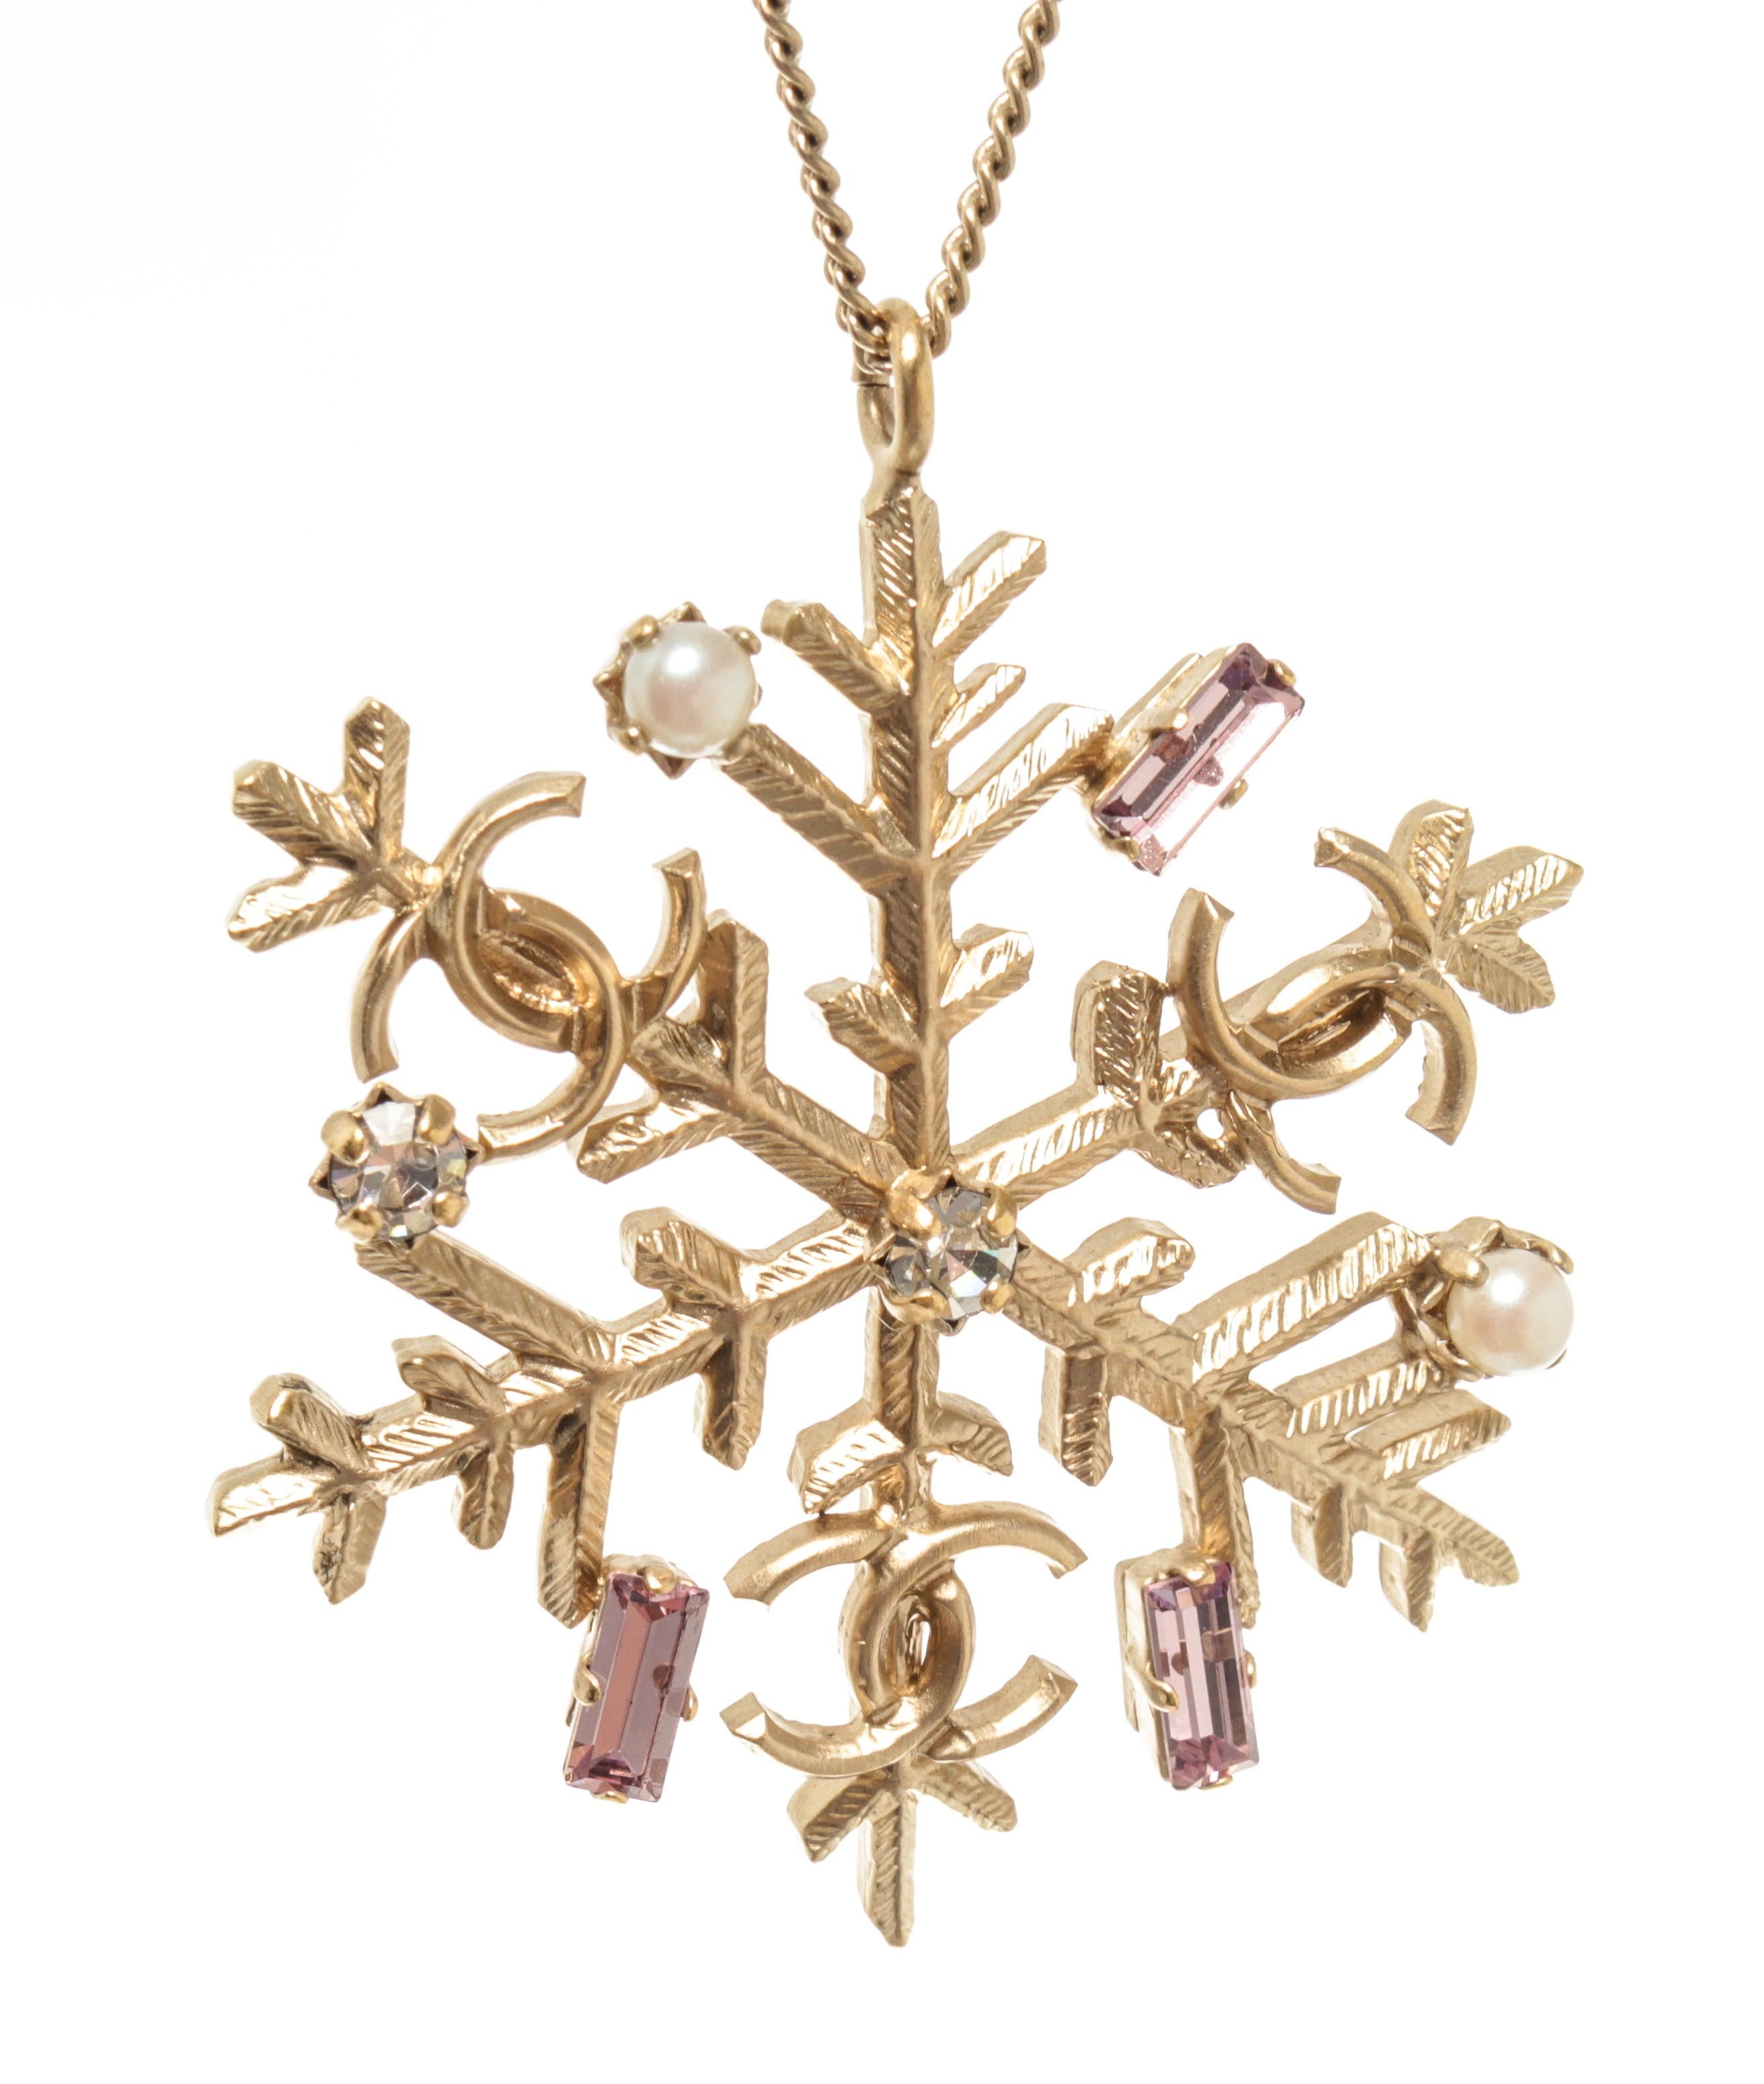 Chanel gold CC snowflake necklace with gold-tone hardware, spring ring closure with two-length options, snowflake pendant with faux pearls, rhinestones, stones, and the CC logos.


770081MSC